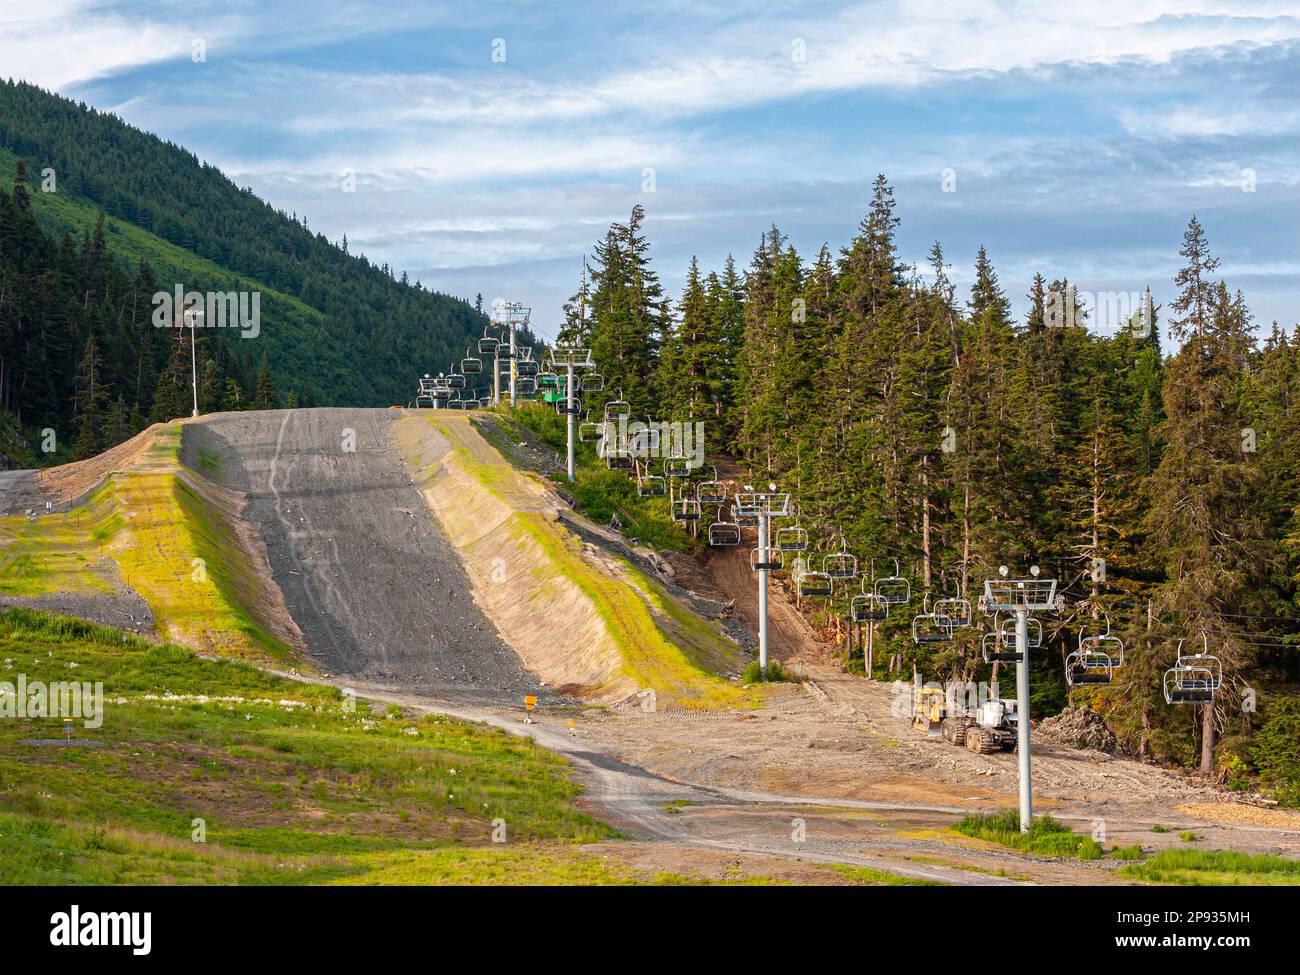 Girdwood Alaska, USA - July 23, 2011: Ski lift goes up the mountains from Alyeska Resort. Summer shows green trees, forested mountains, gray road, und Stock Photo